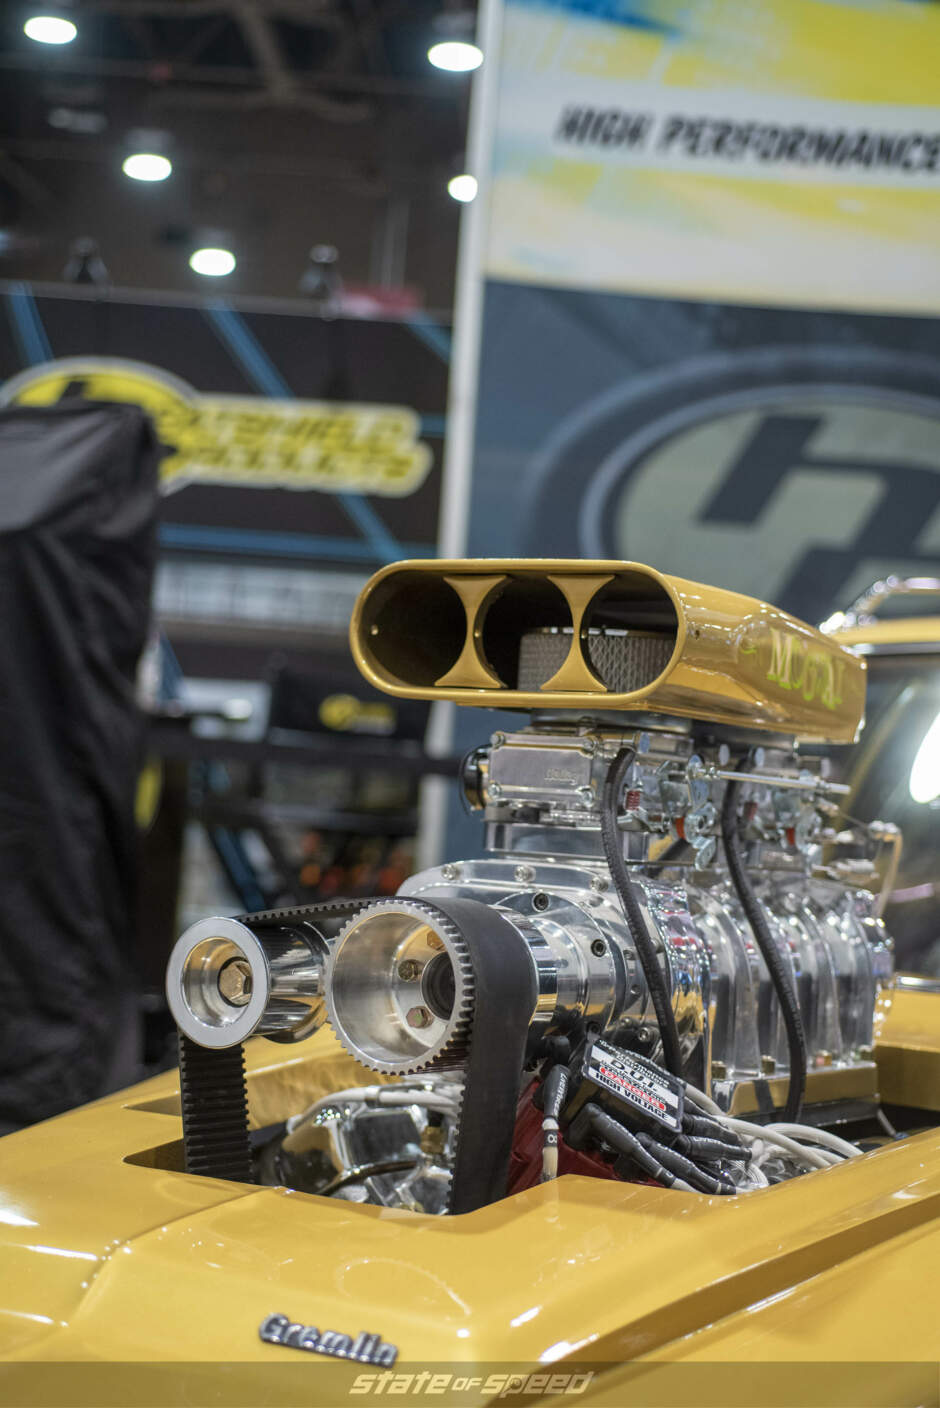 Blower on the one of a kind Gremlin hot rod at the Heatshield Products booth